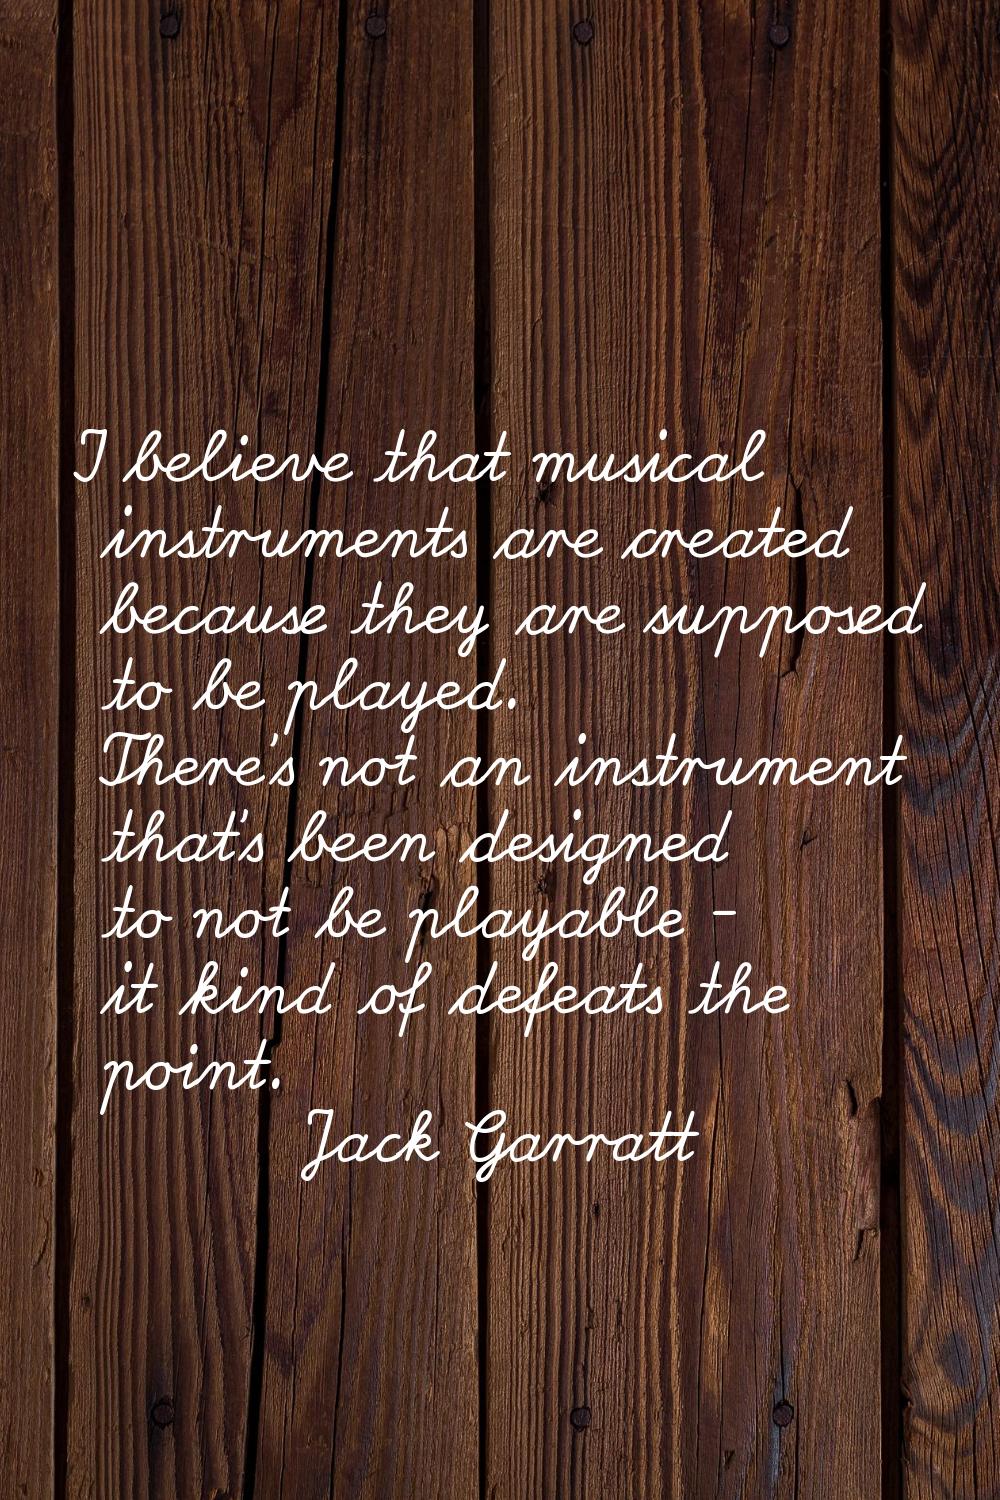 I believe that musical instruments are created because they are supposed to be played. There's not 